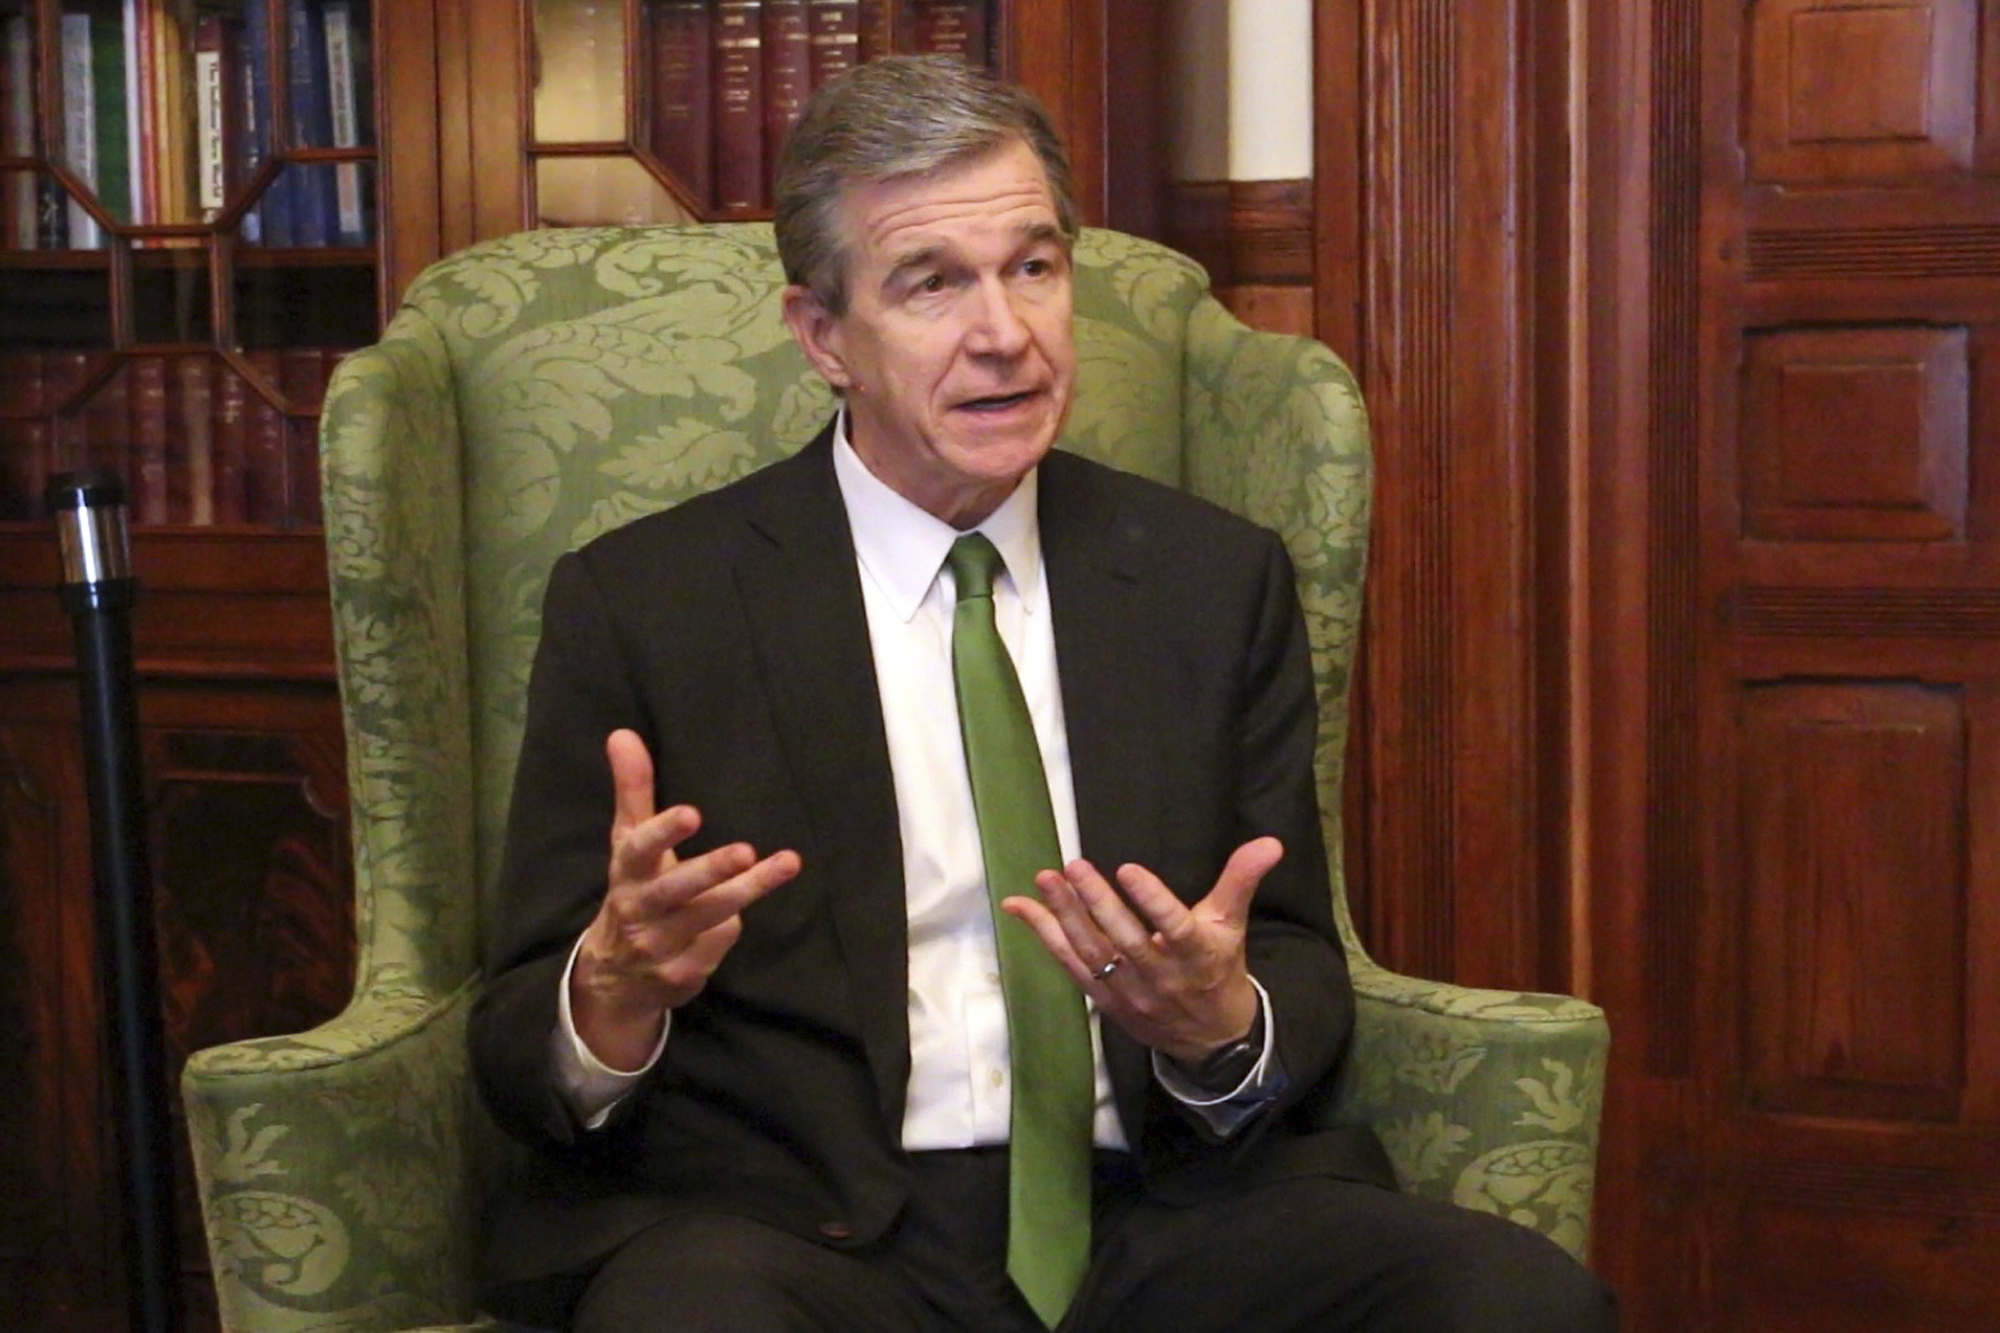 North Carolina governor slams state GOP for overturning his veto of their 12-week abortion ban